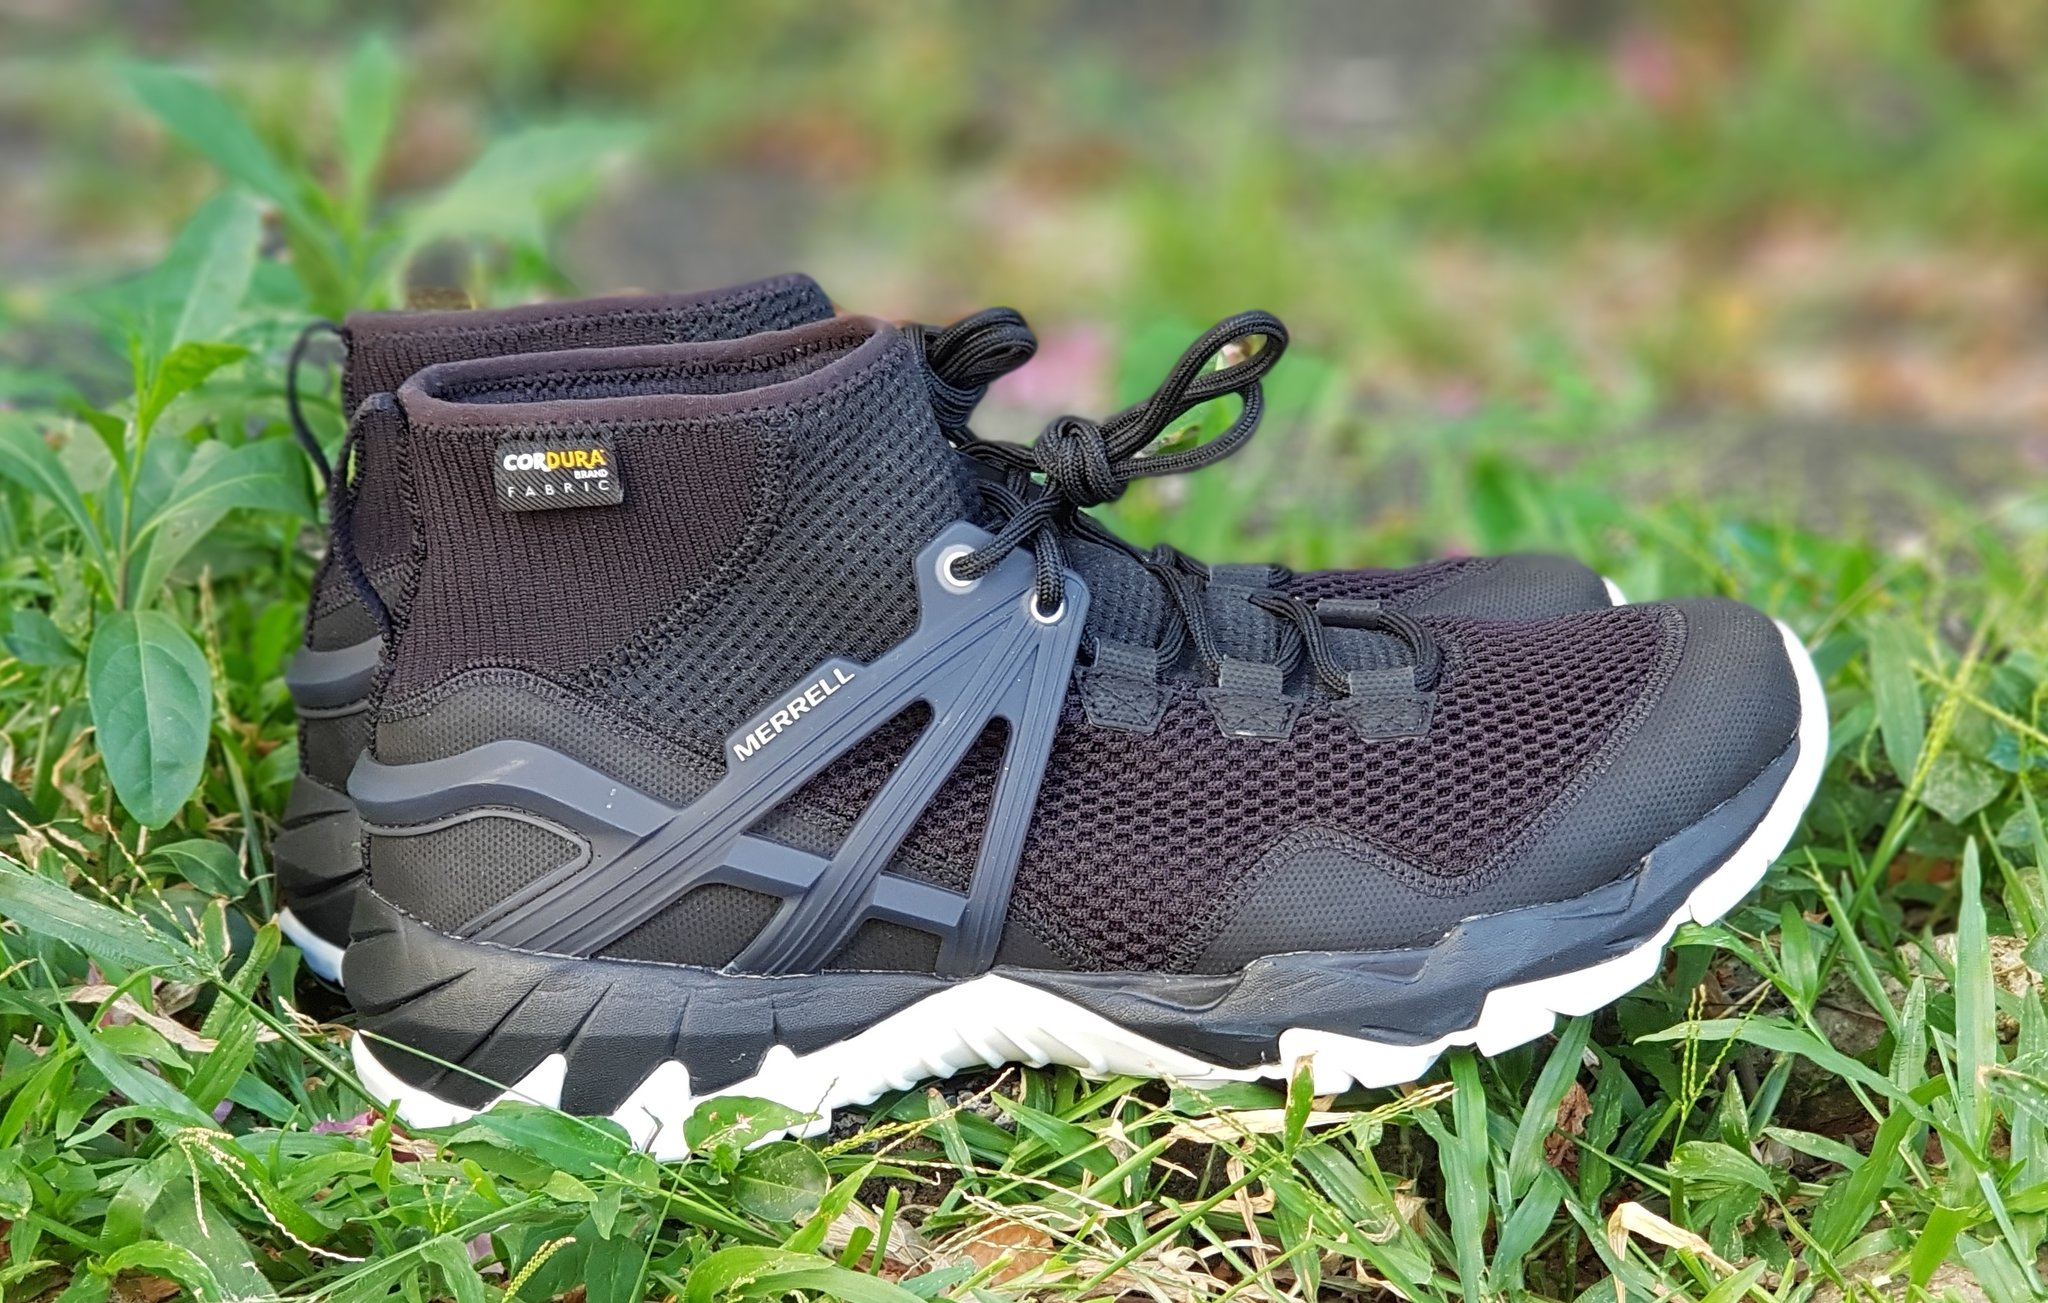 for eksempel Horn Monet Mark Zambrano on Twitter: "This sexy beast from @Merrell_PH is the MQM Rush  Flex in black colorway. Equipped with Cordura fabric for superior support  in any adventure! #merrell #getawaytoadventure #kicks #toughgear  https://t.co/kVMYVhzK0Y" /